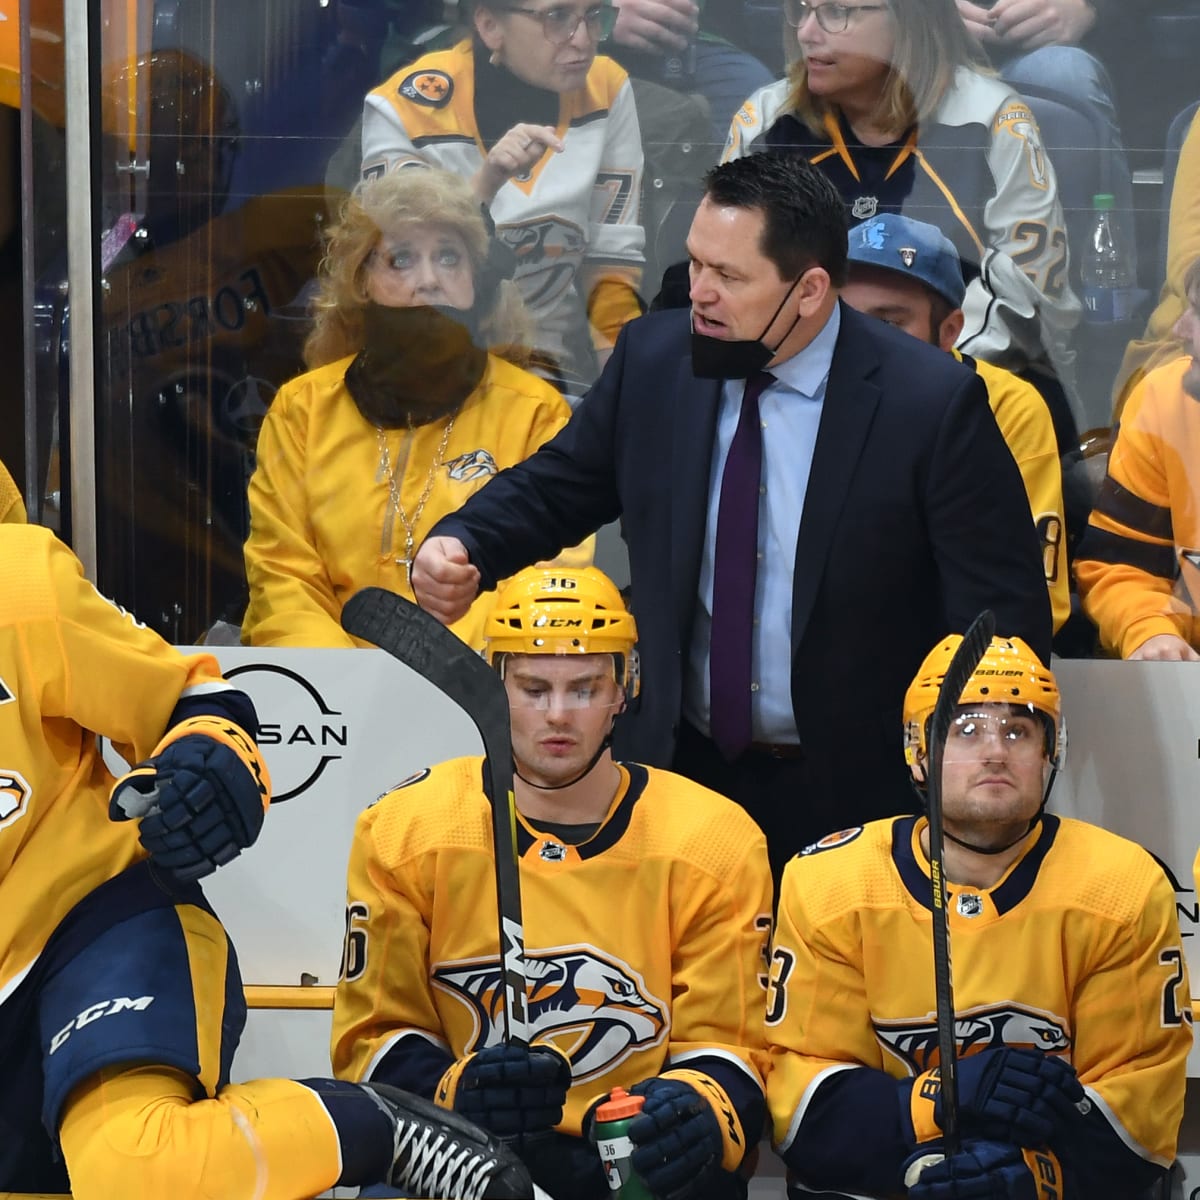 Admirals head coach Karl Taylor gets first NHL win with the Predators